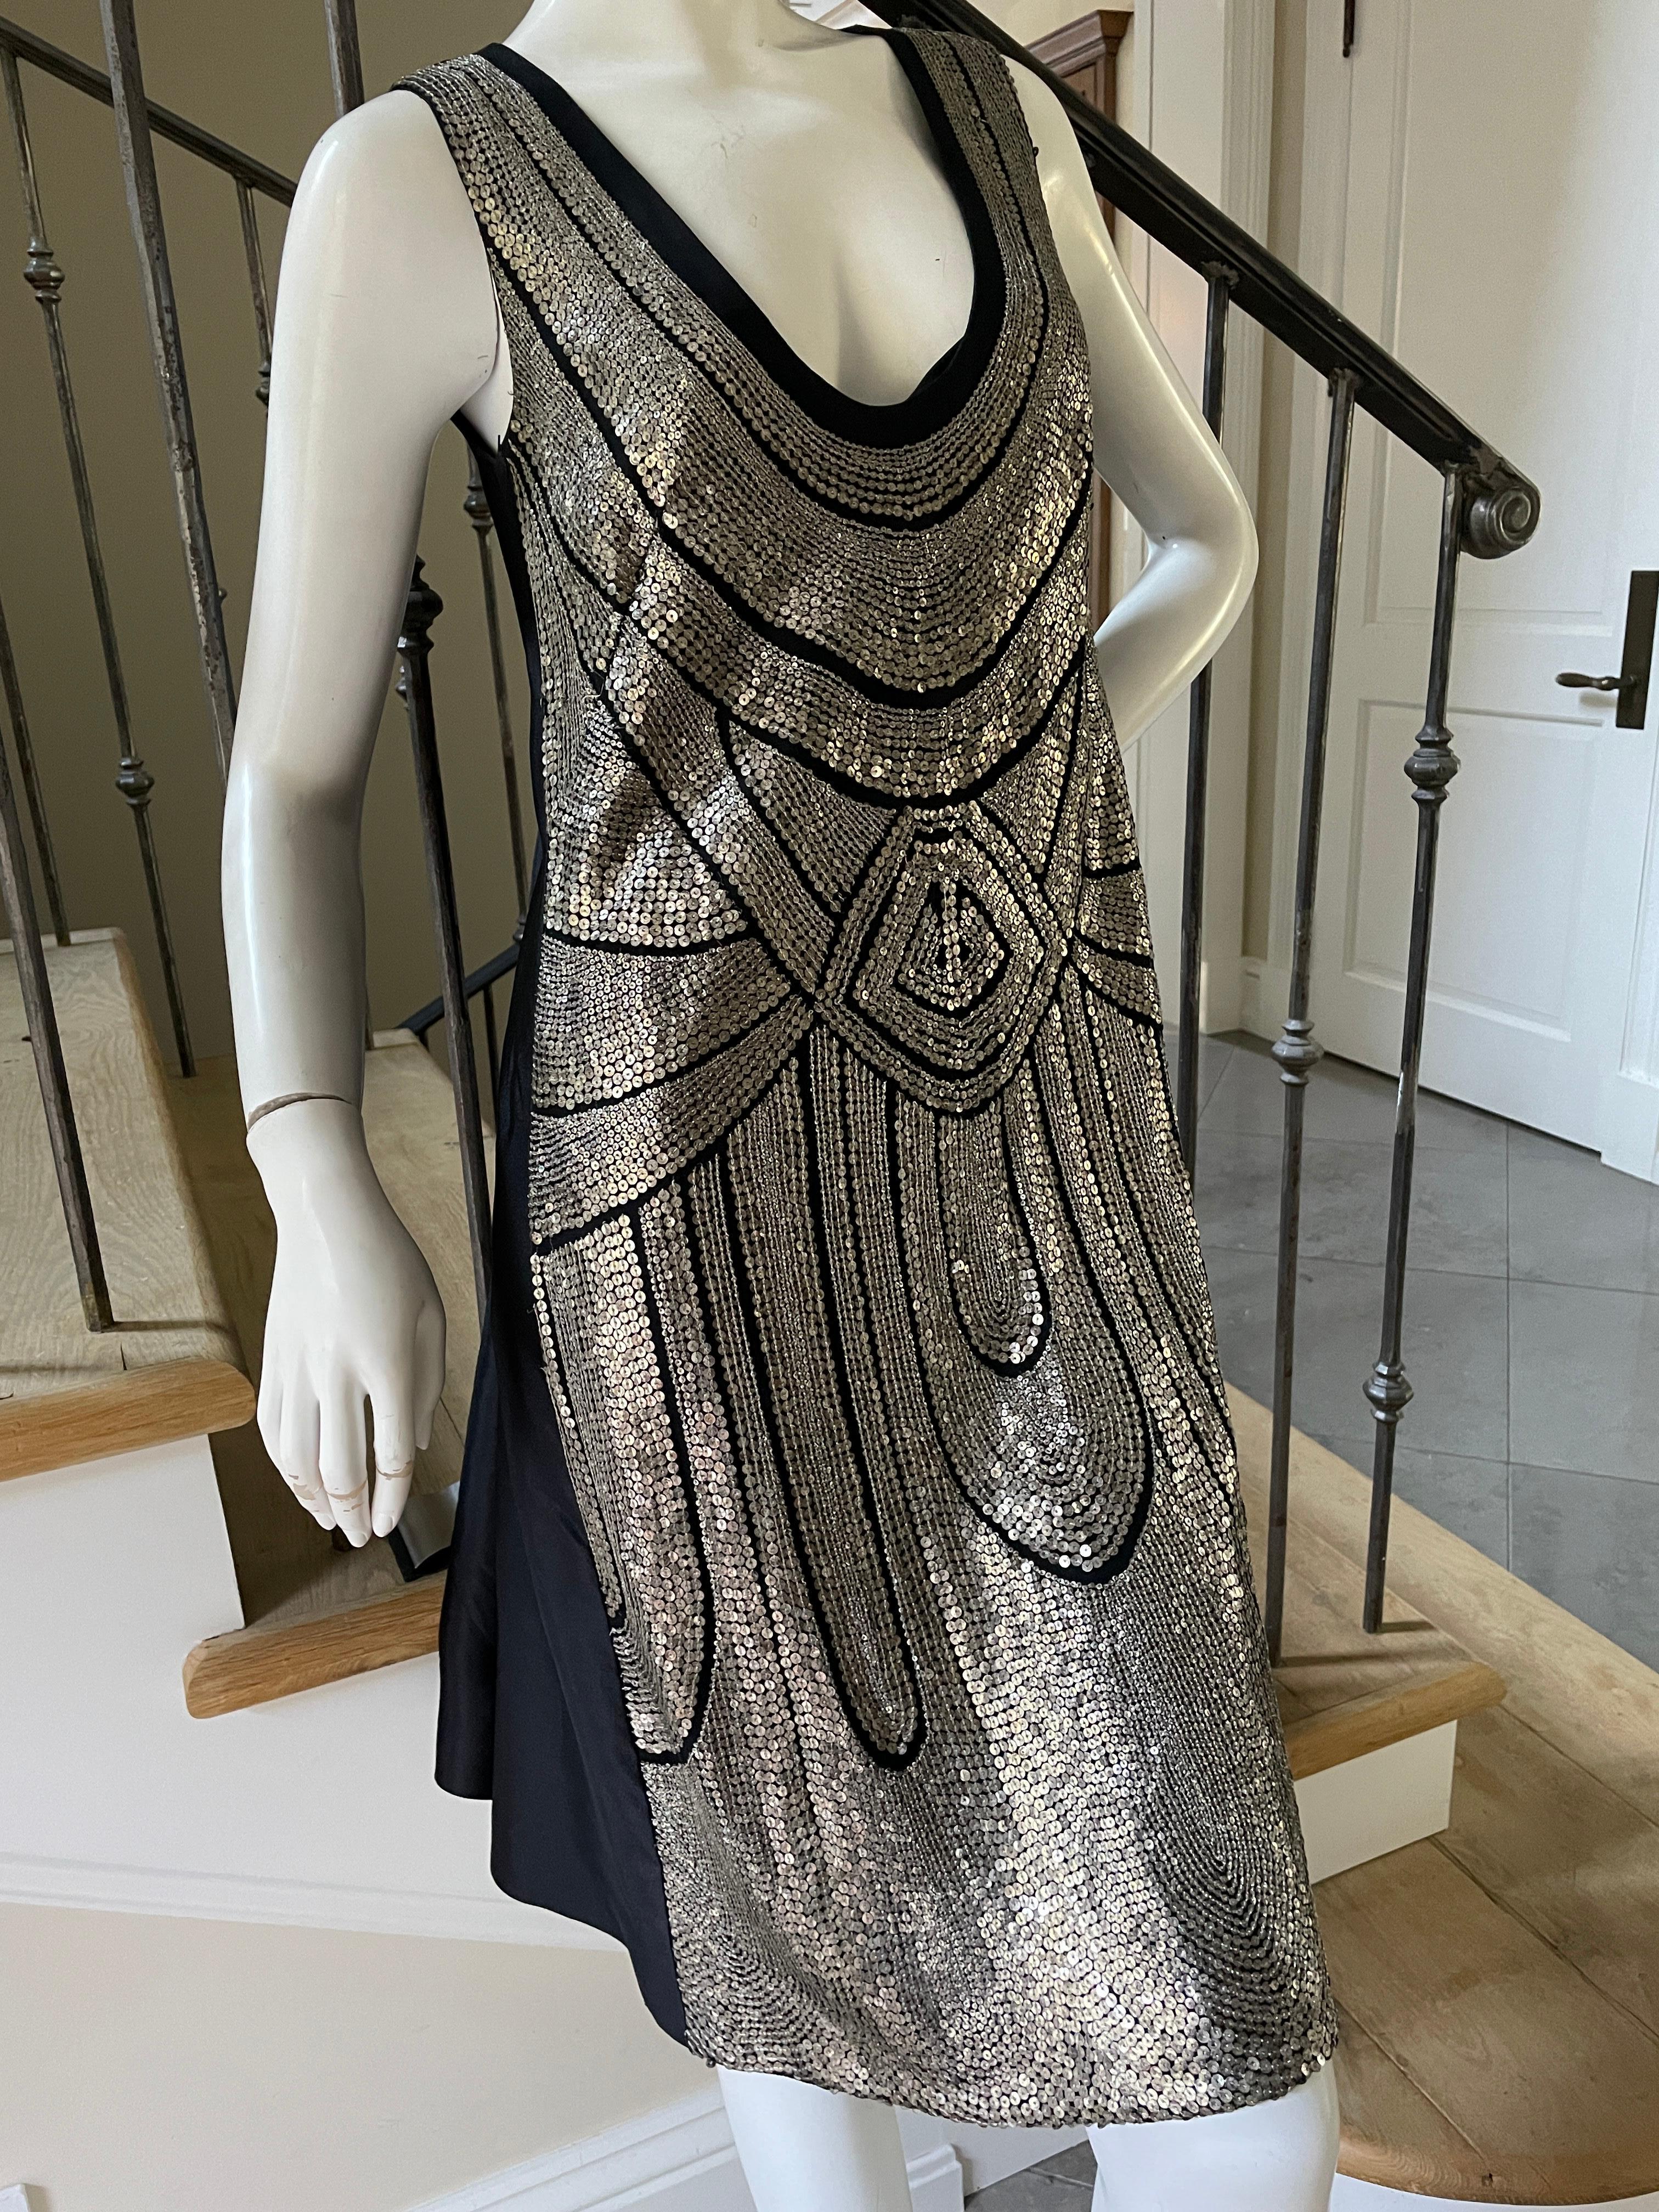 Alberta Ferretti Sequin Embellished  Flapper Style Vintage Dress In Excellent Condition For Sale In Cloverdale, CA